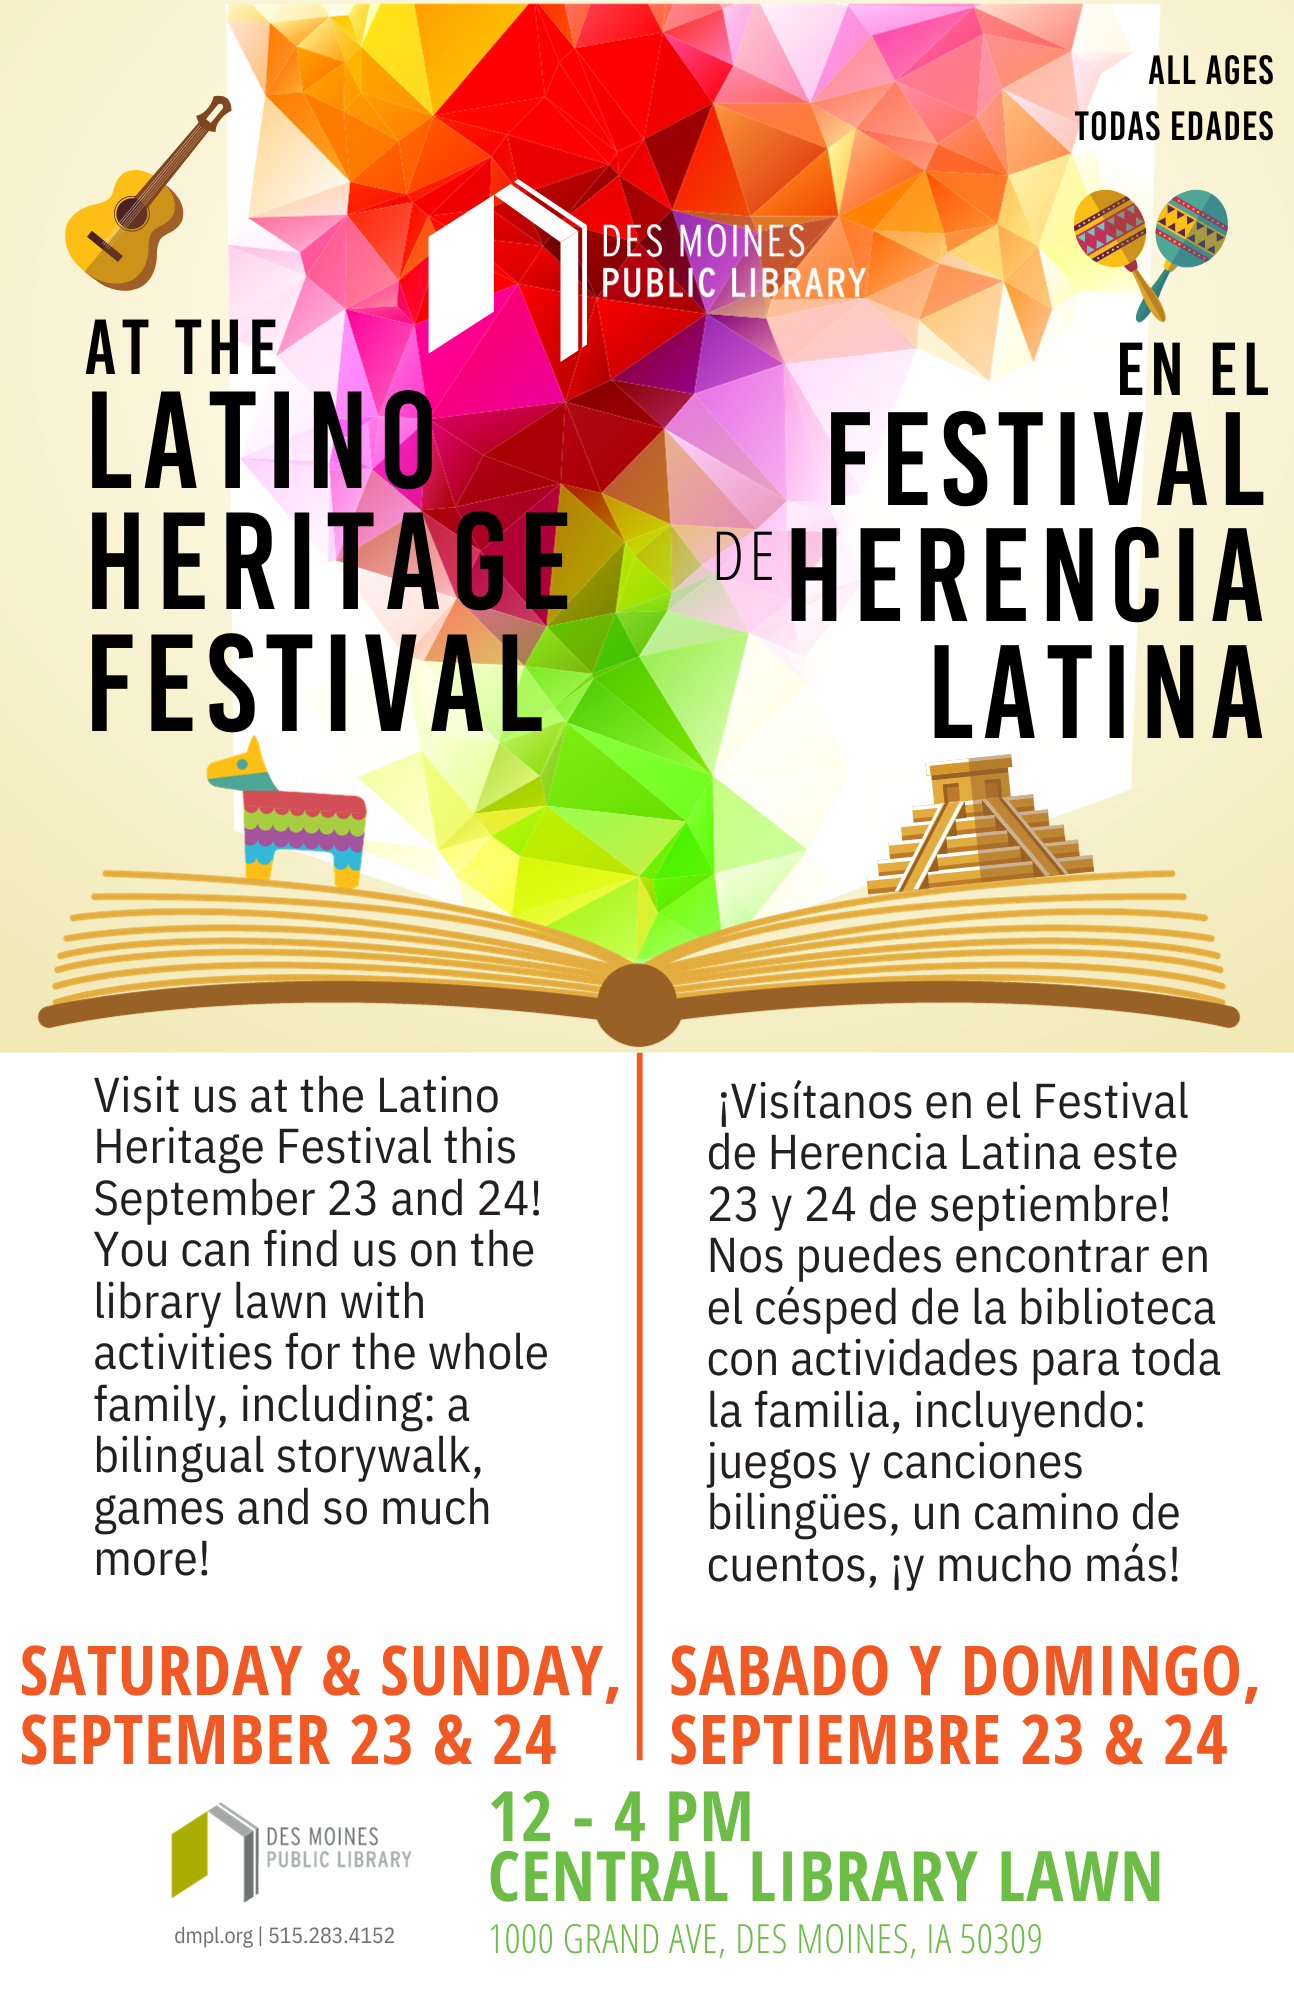 Celebrate with DMPL at the Iowa Latino Heritage Festival! Des Moines